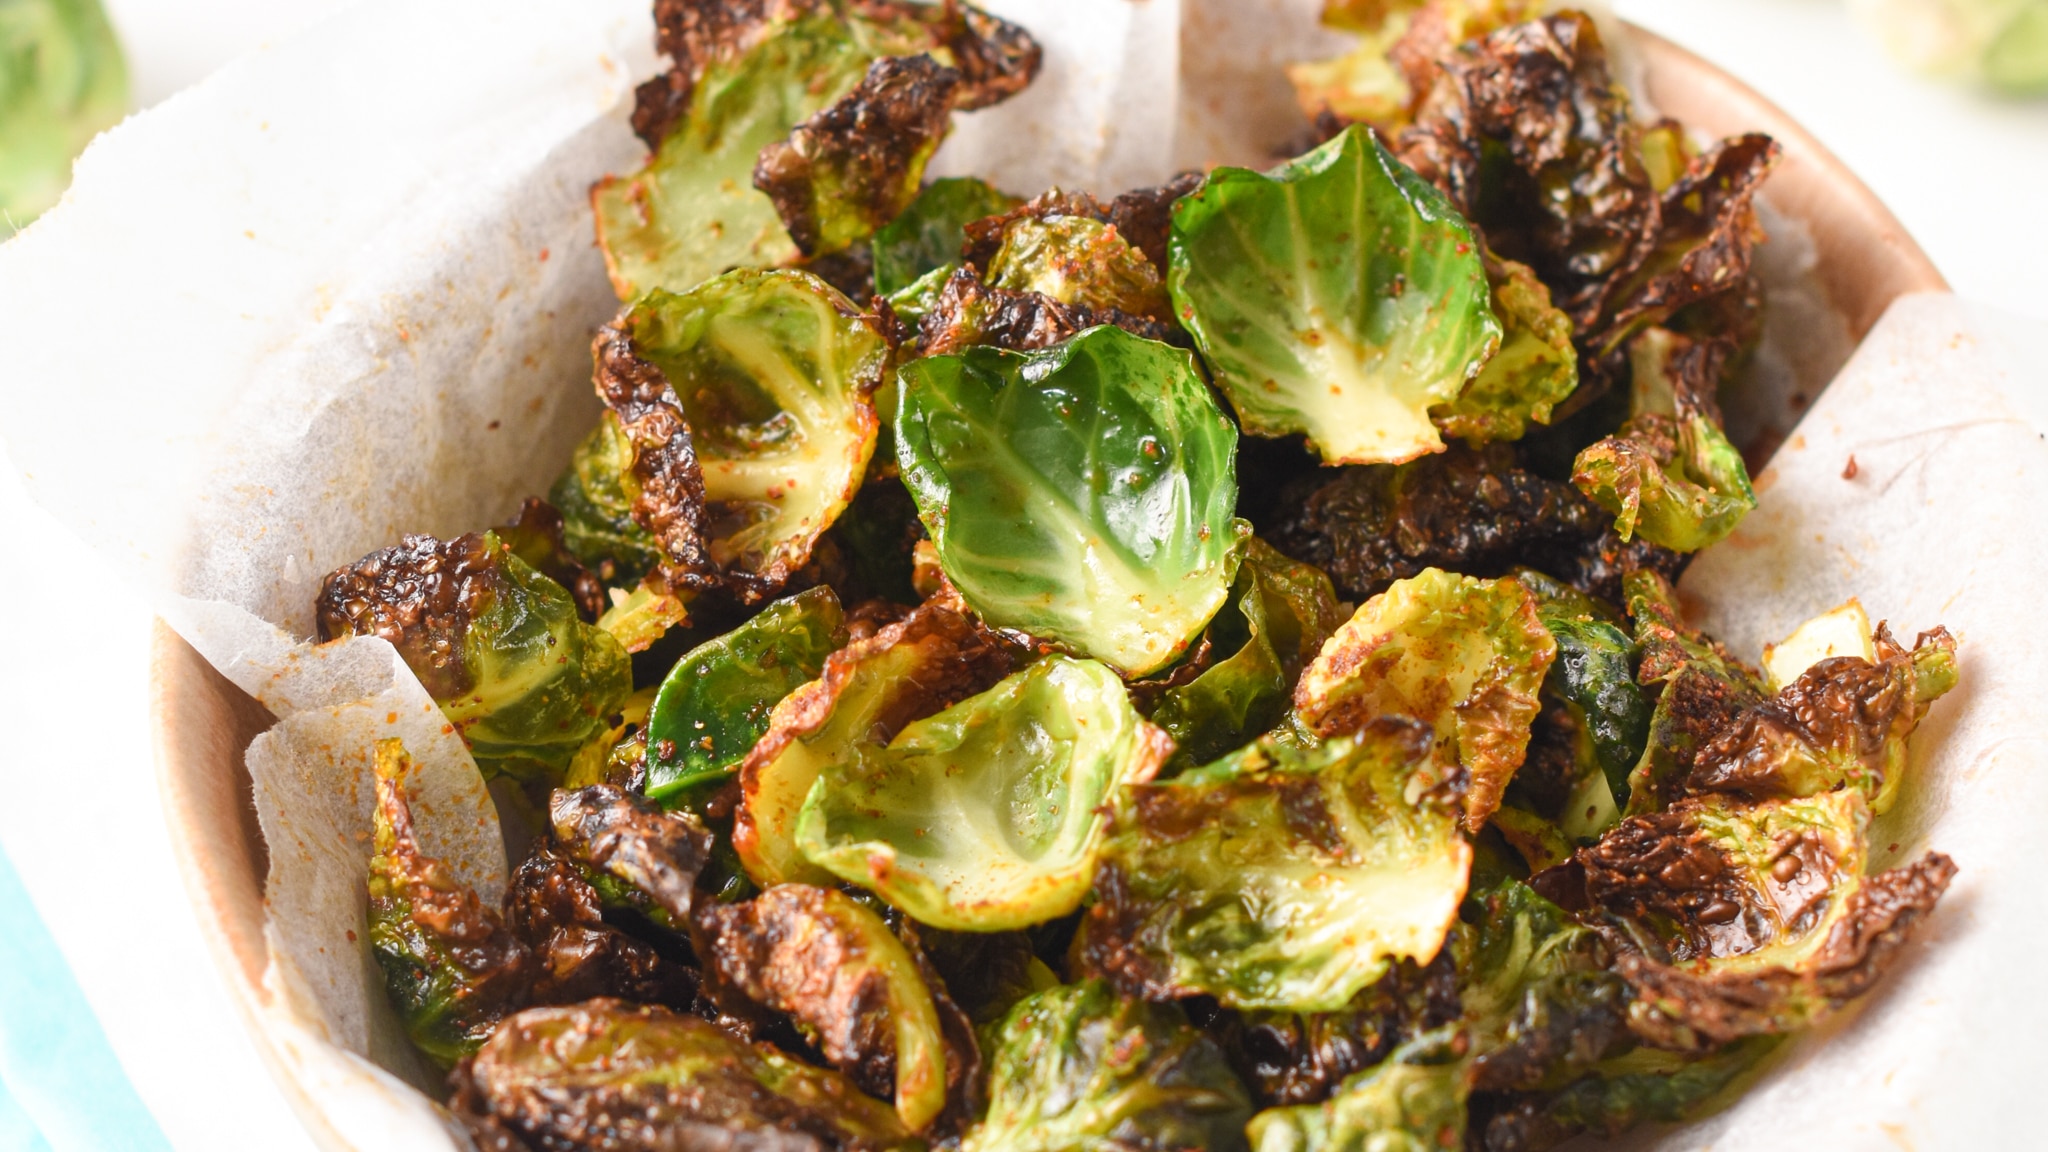 Brussel Sprout Chips